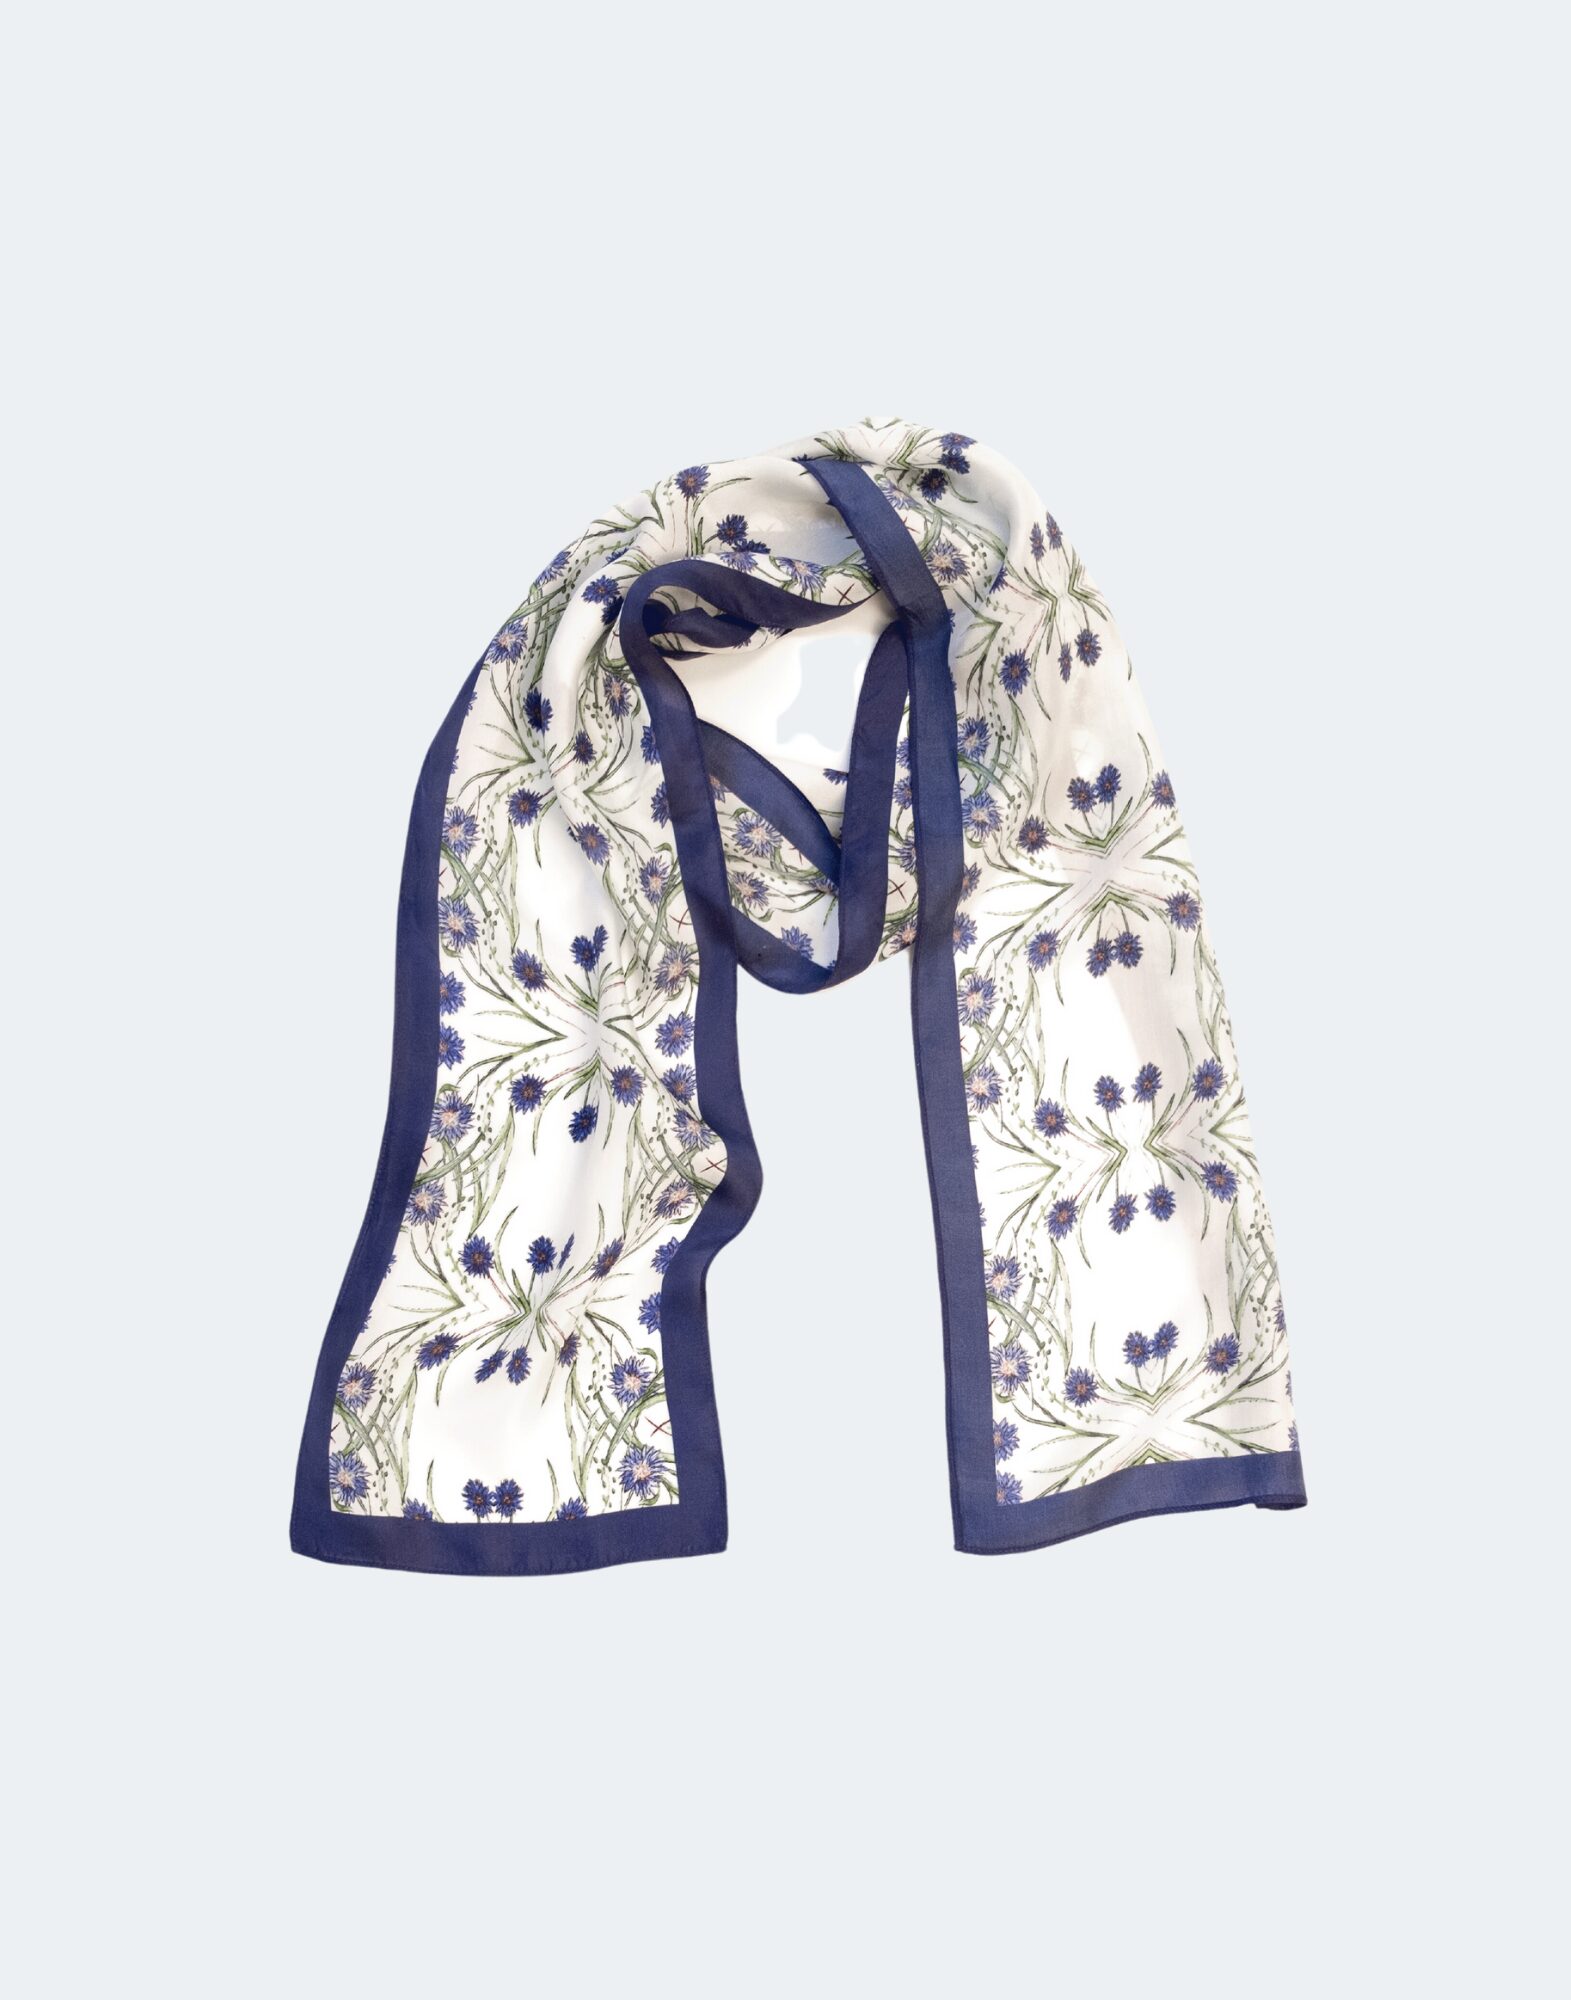 blue and white scarf with pattern of cornflowers